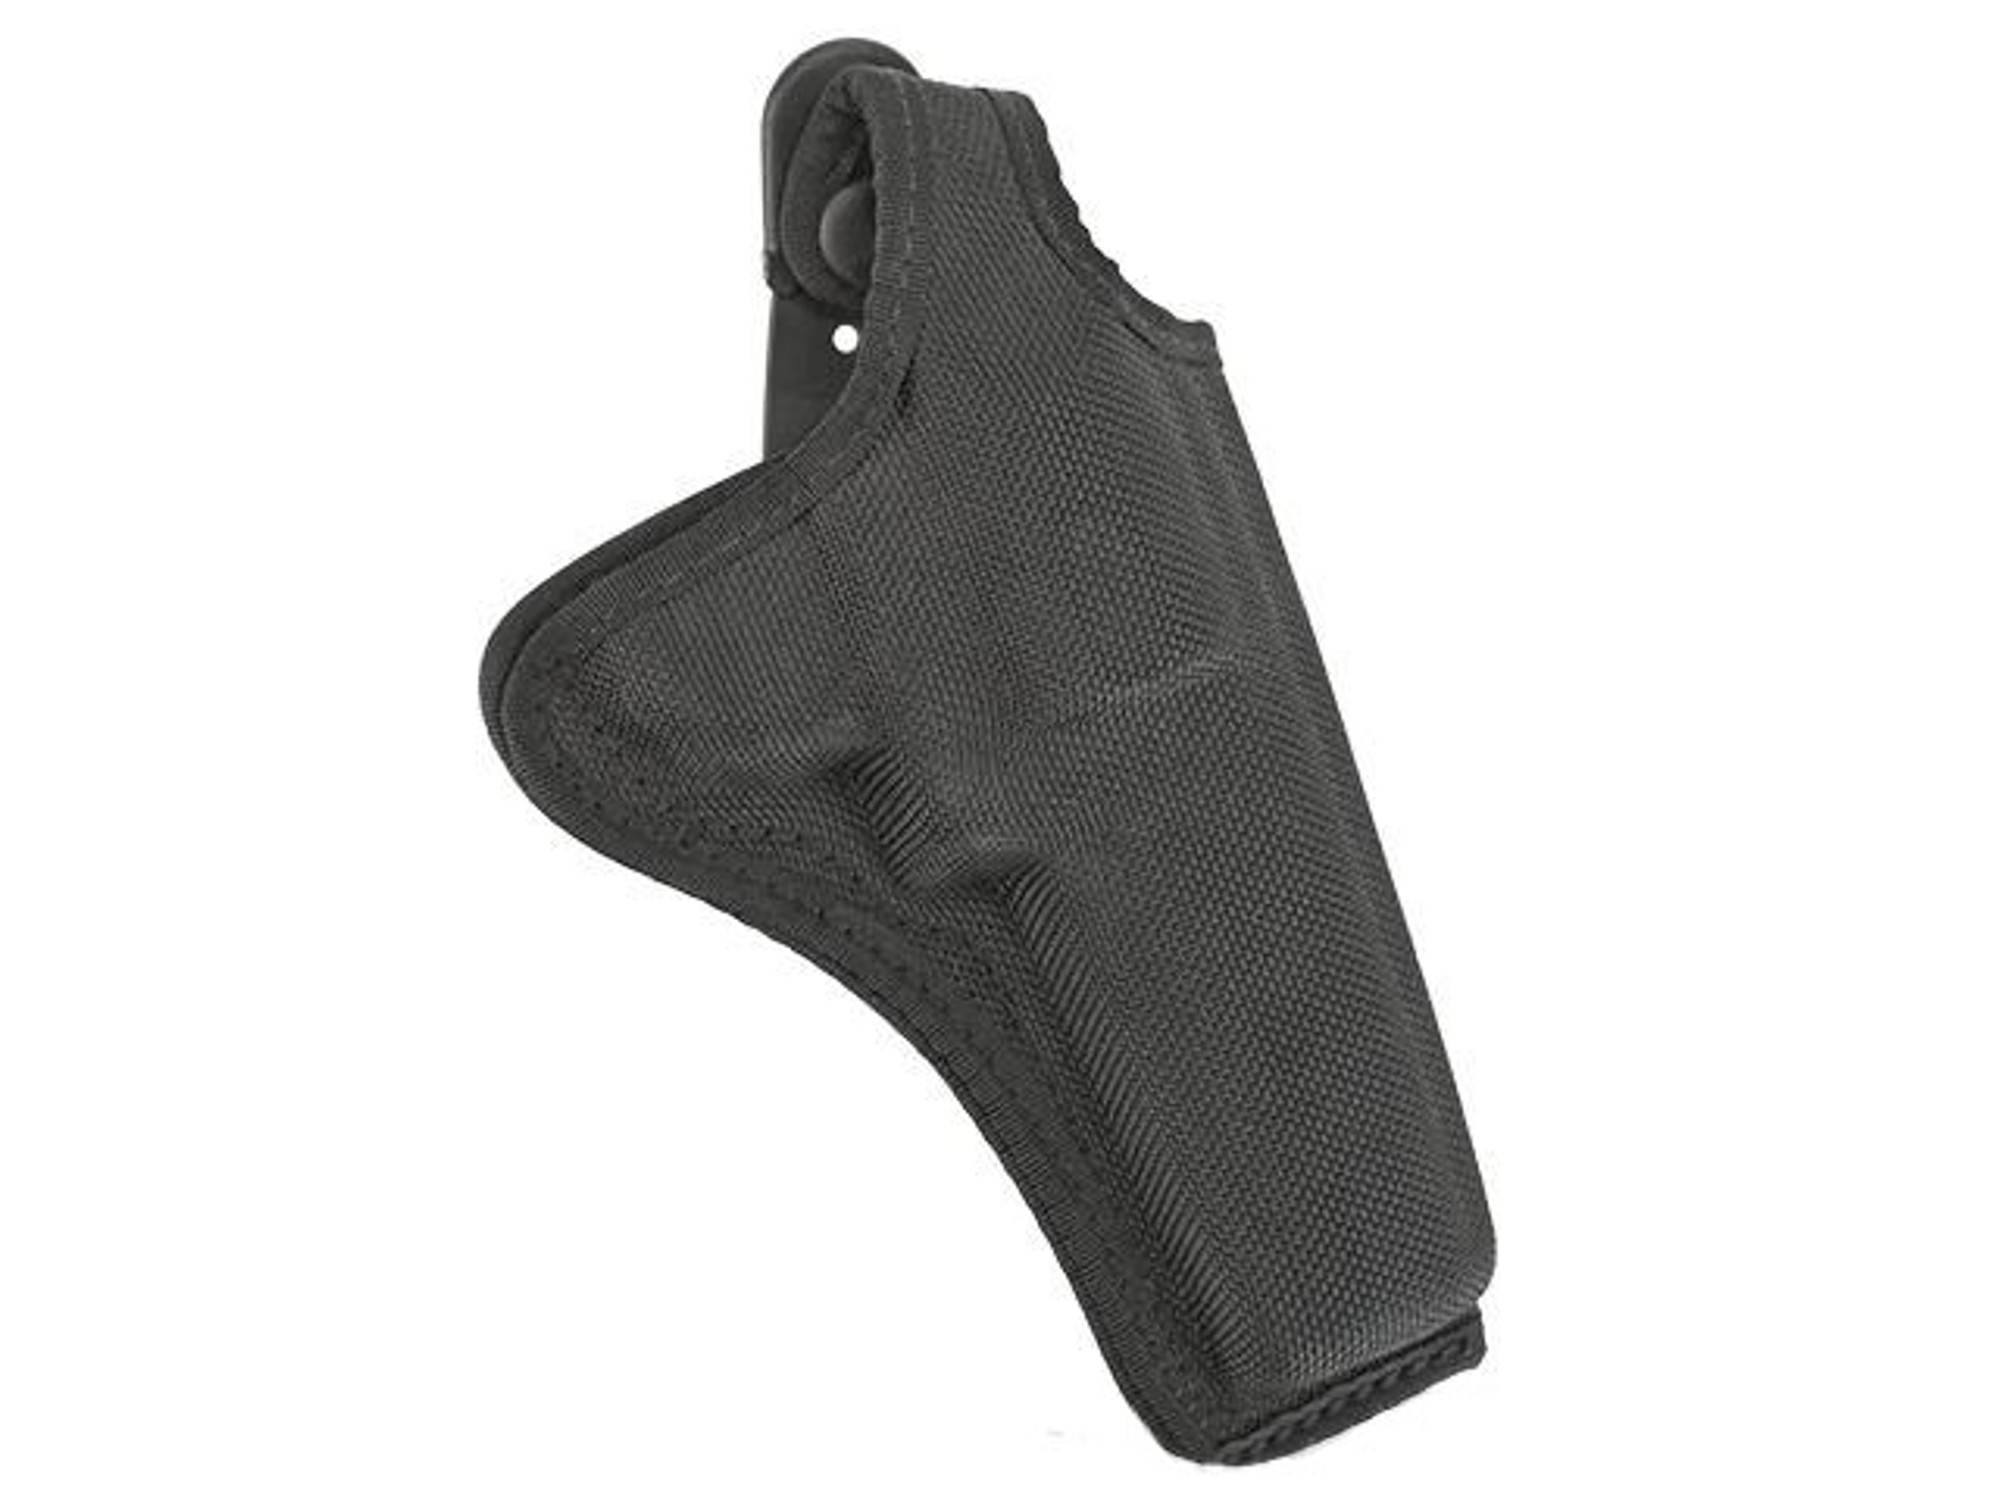 SAFARILAND / BIANCHI AccuMold Belt Clip Holster with Thumbsnap - 4" Colt King Cobra / 4" Python (Right)